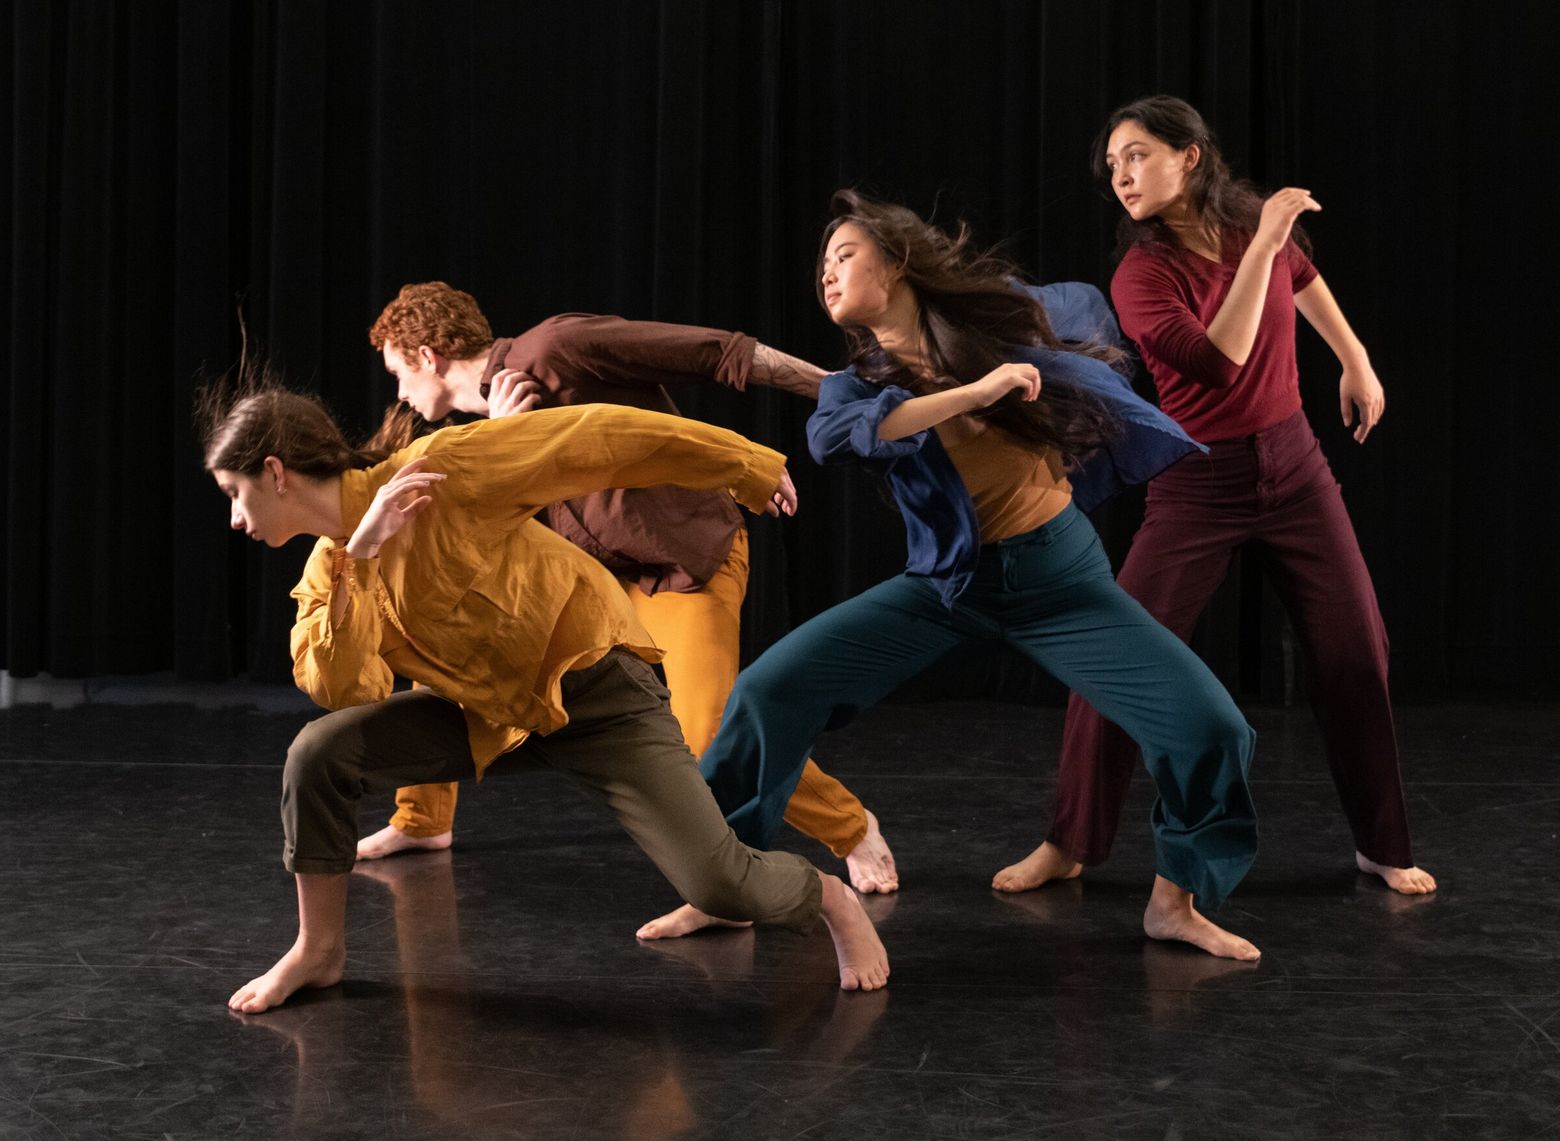 At UW, 2 choreographers dive into jazz | The Seattle Times